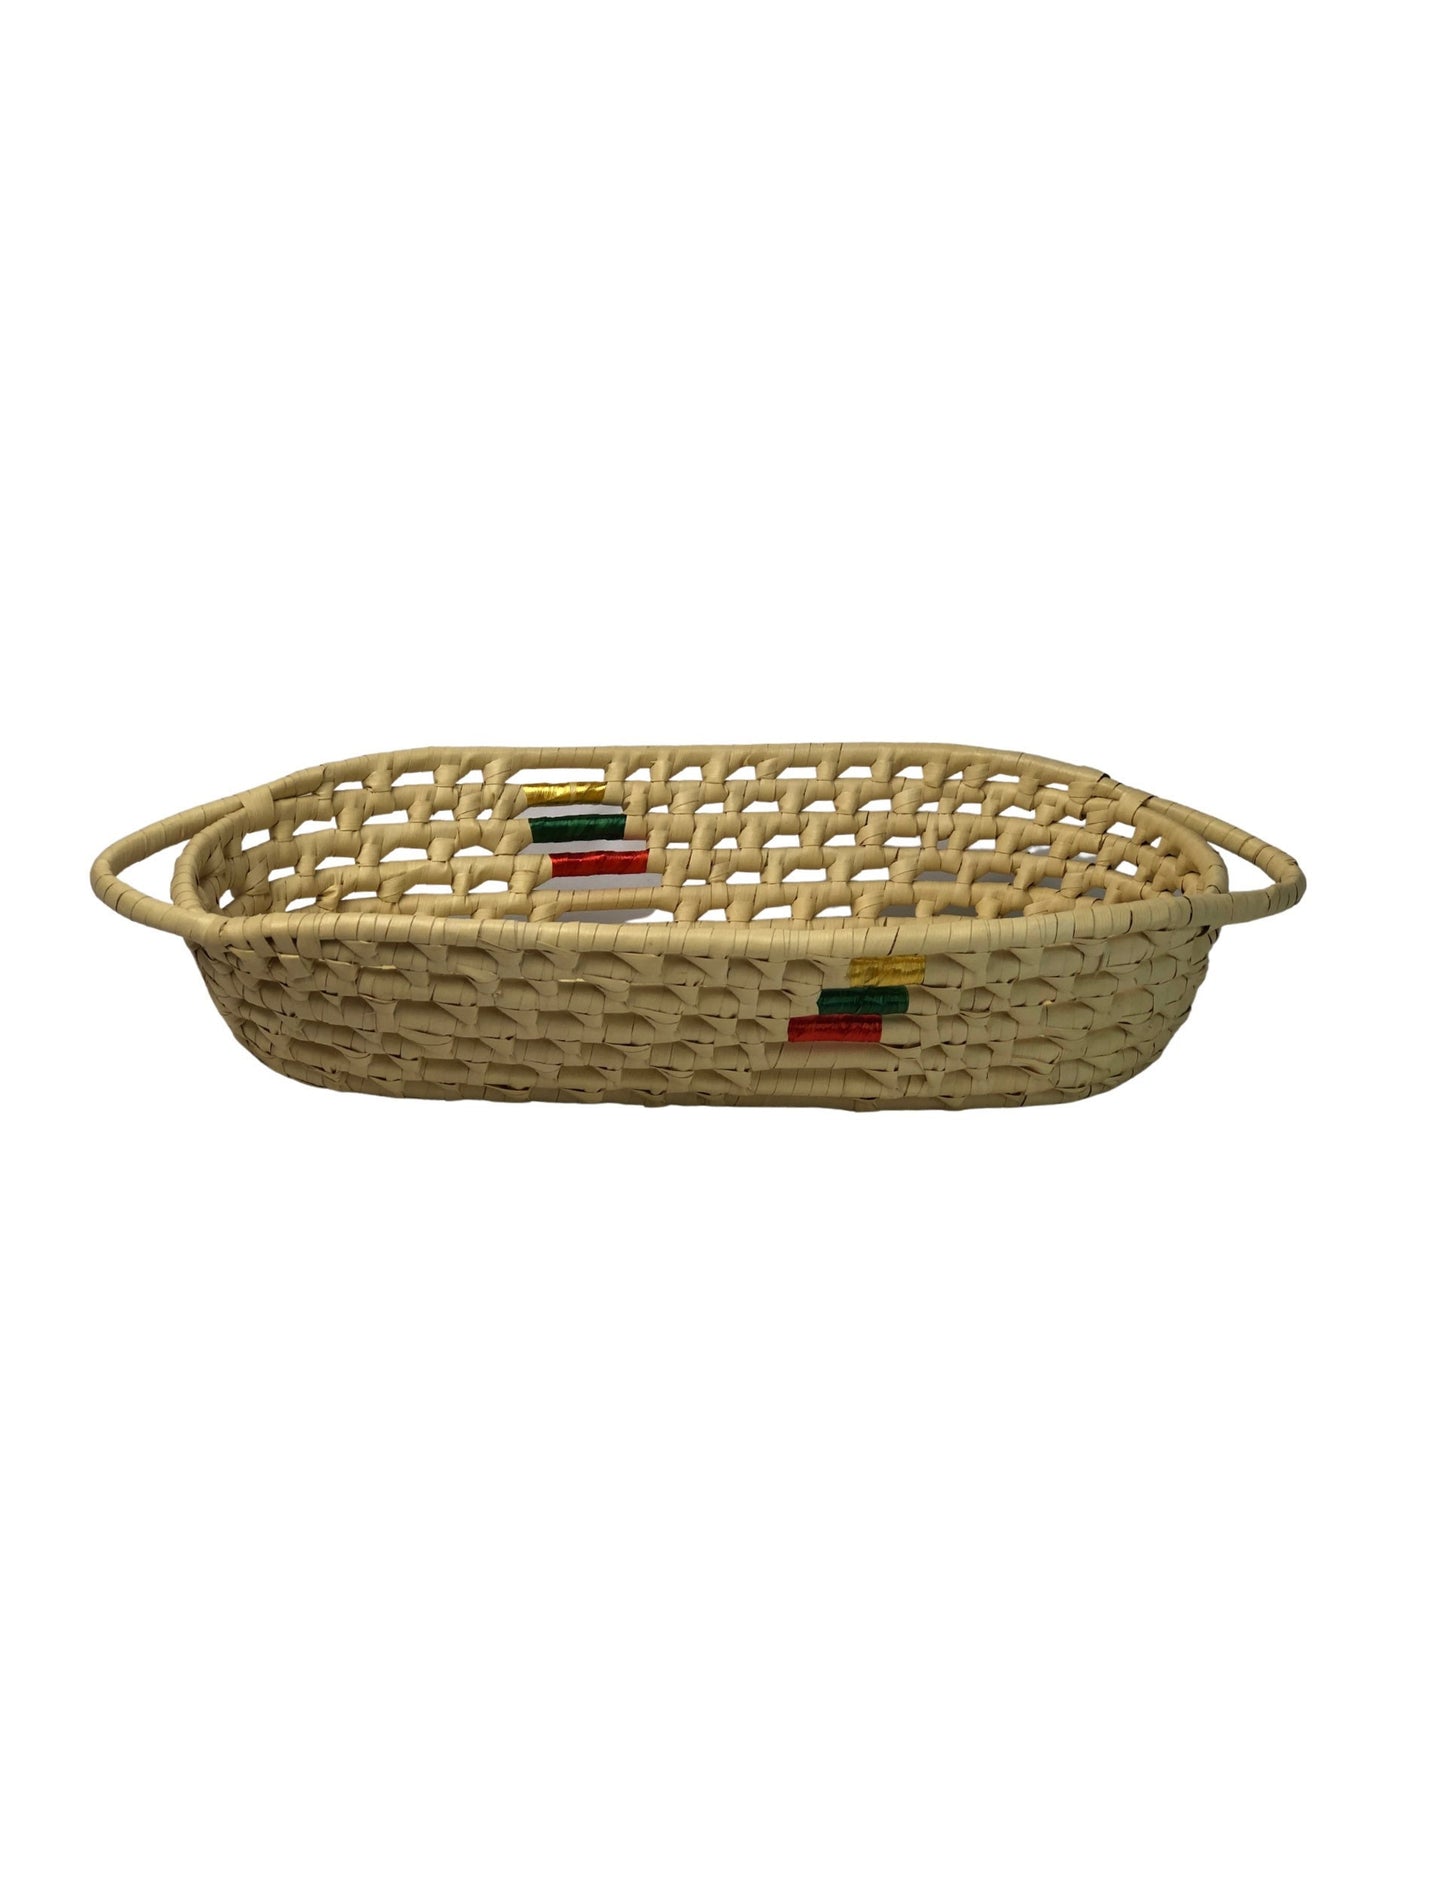 Vintage 80’s Straw Long Catchall Basket with Handles Boho Home Decor 16 x 3.5 x 3